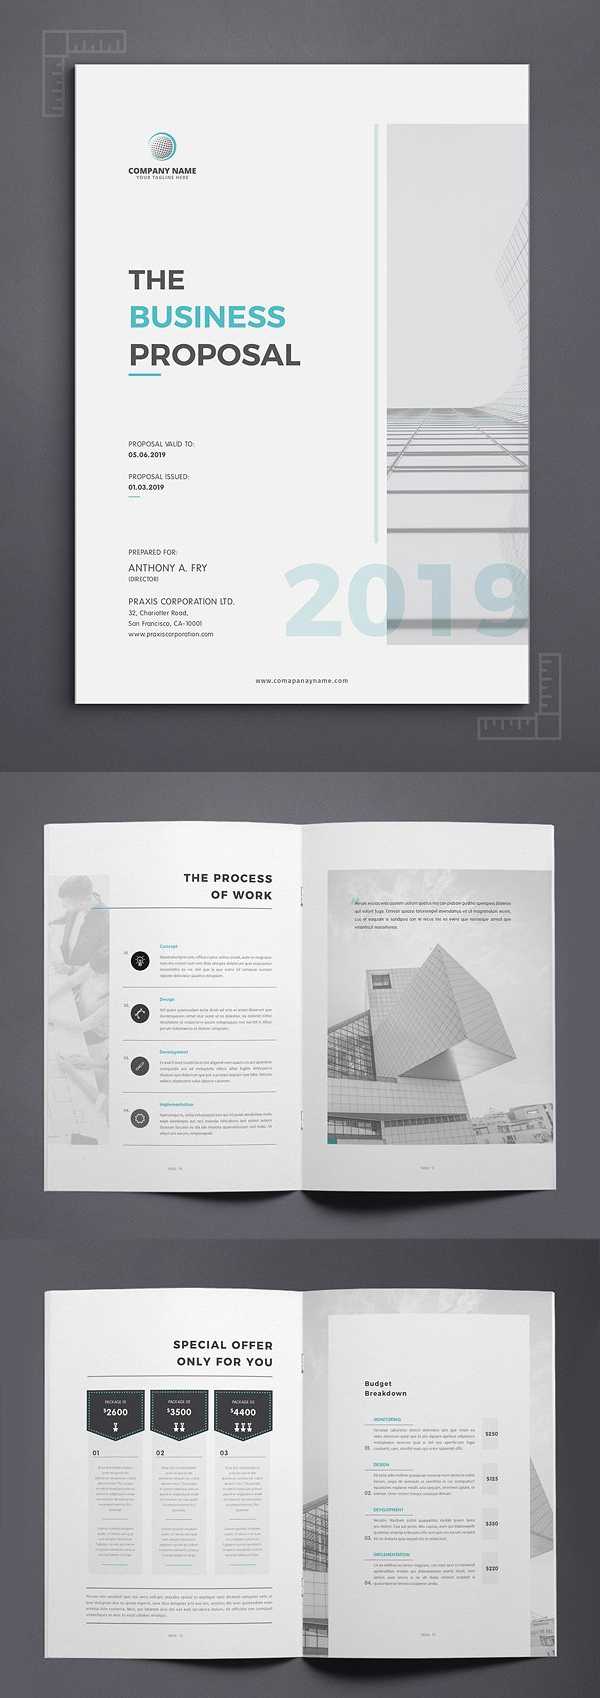 Business Proposal Templates | Design | Graphic Design Junction For Free Business Proposal Template Ms Word